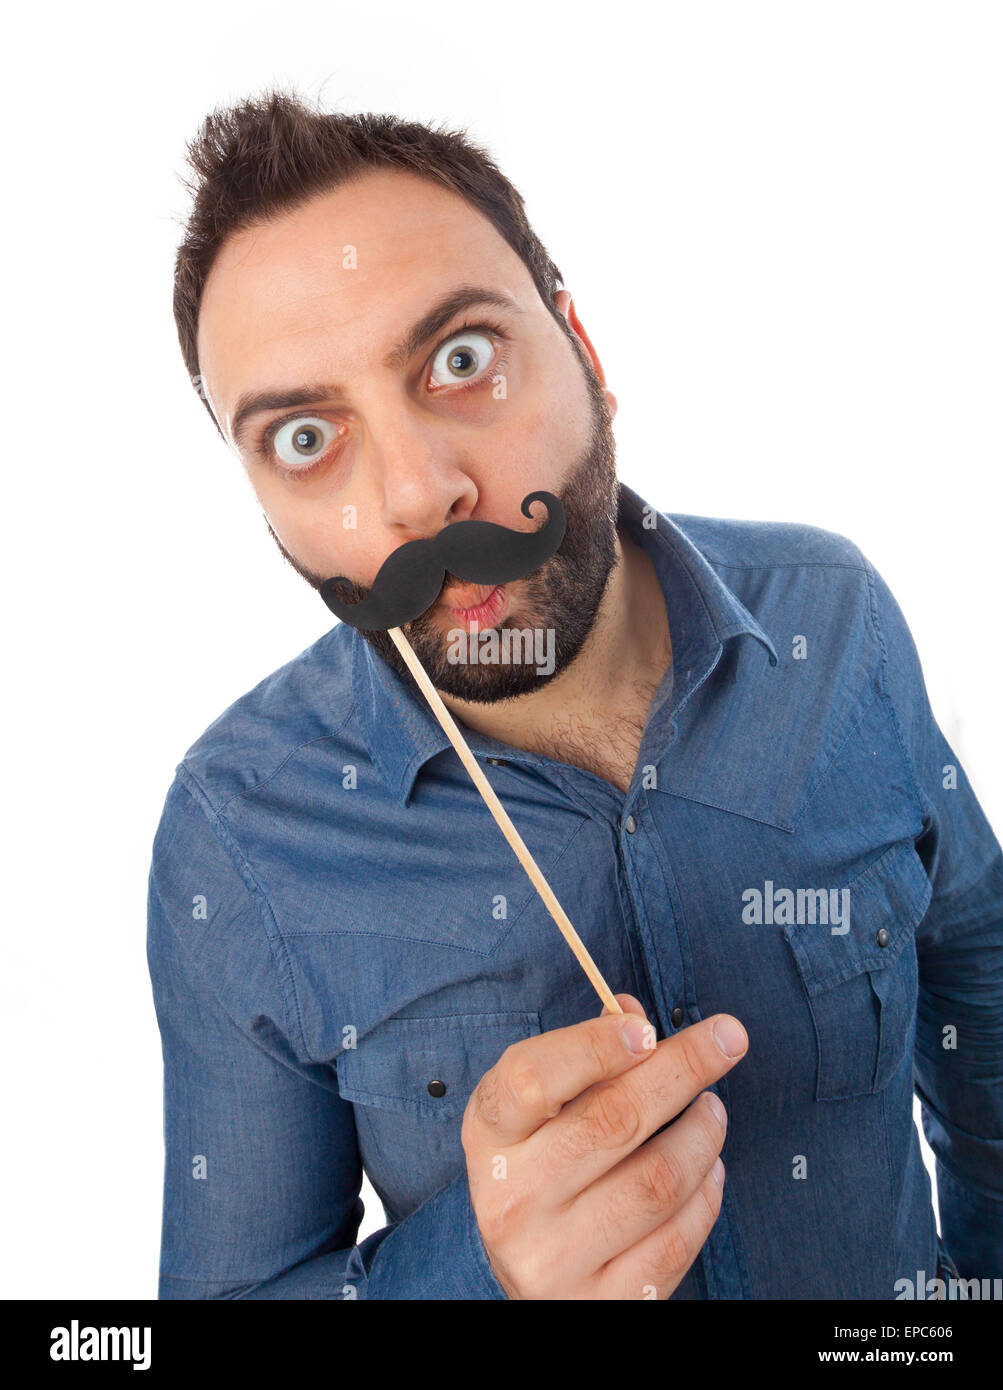 Young man with photo booth mustache on white background Stock Photo - Alamy